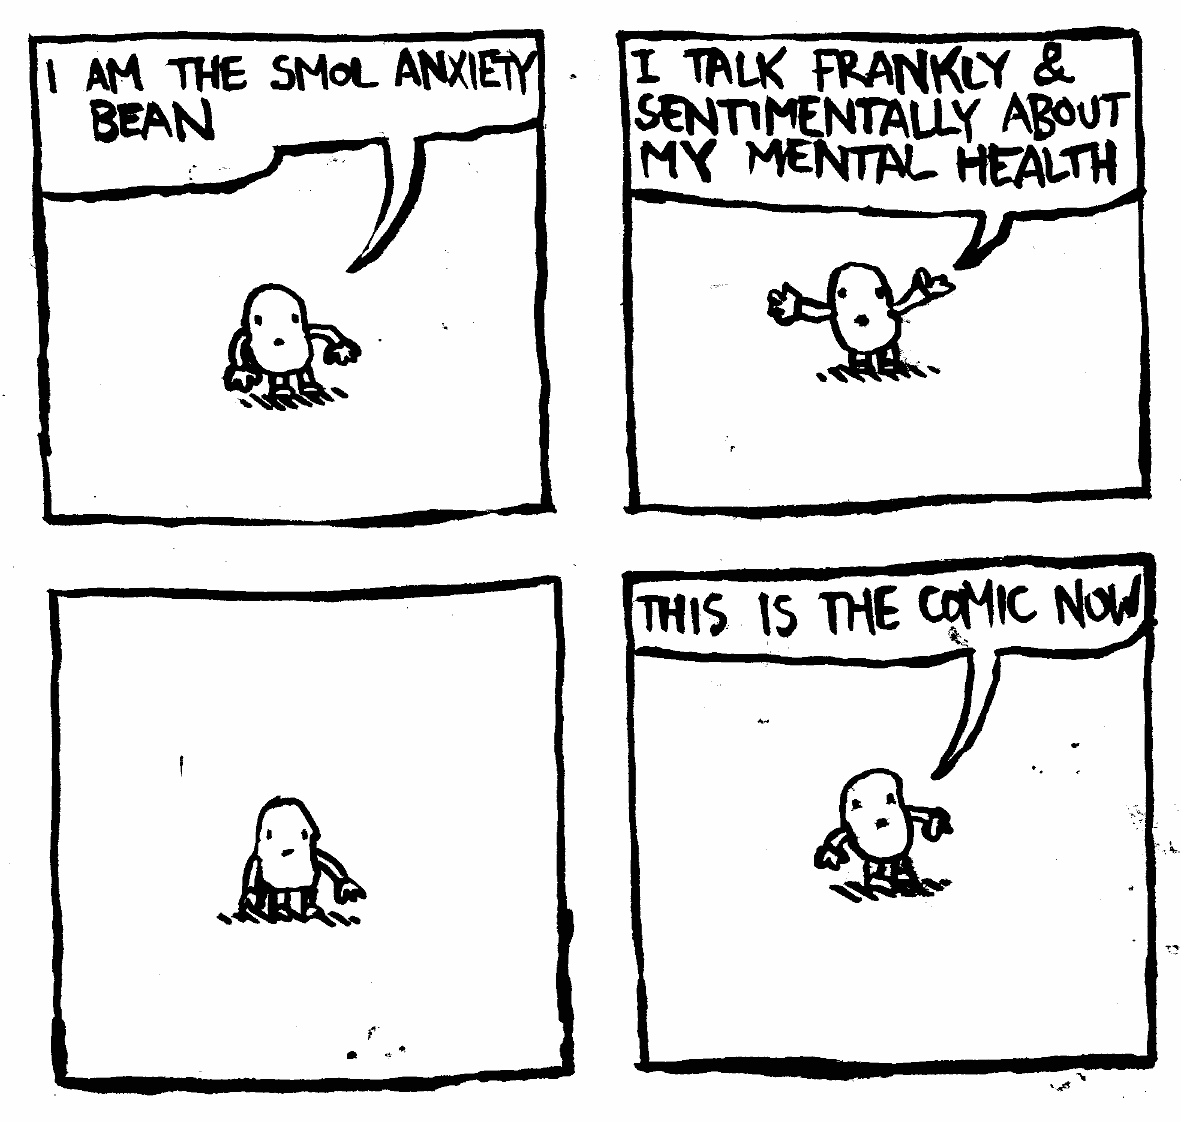 getting nervous neurotic frankly and sentimentally about my mental health this is the comic now